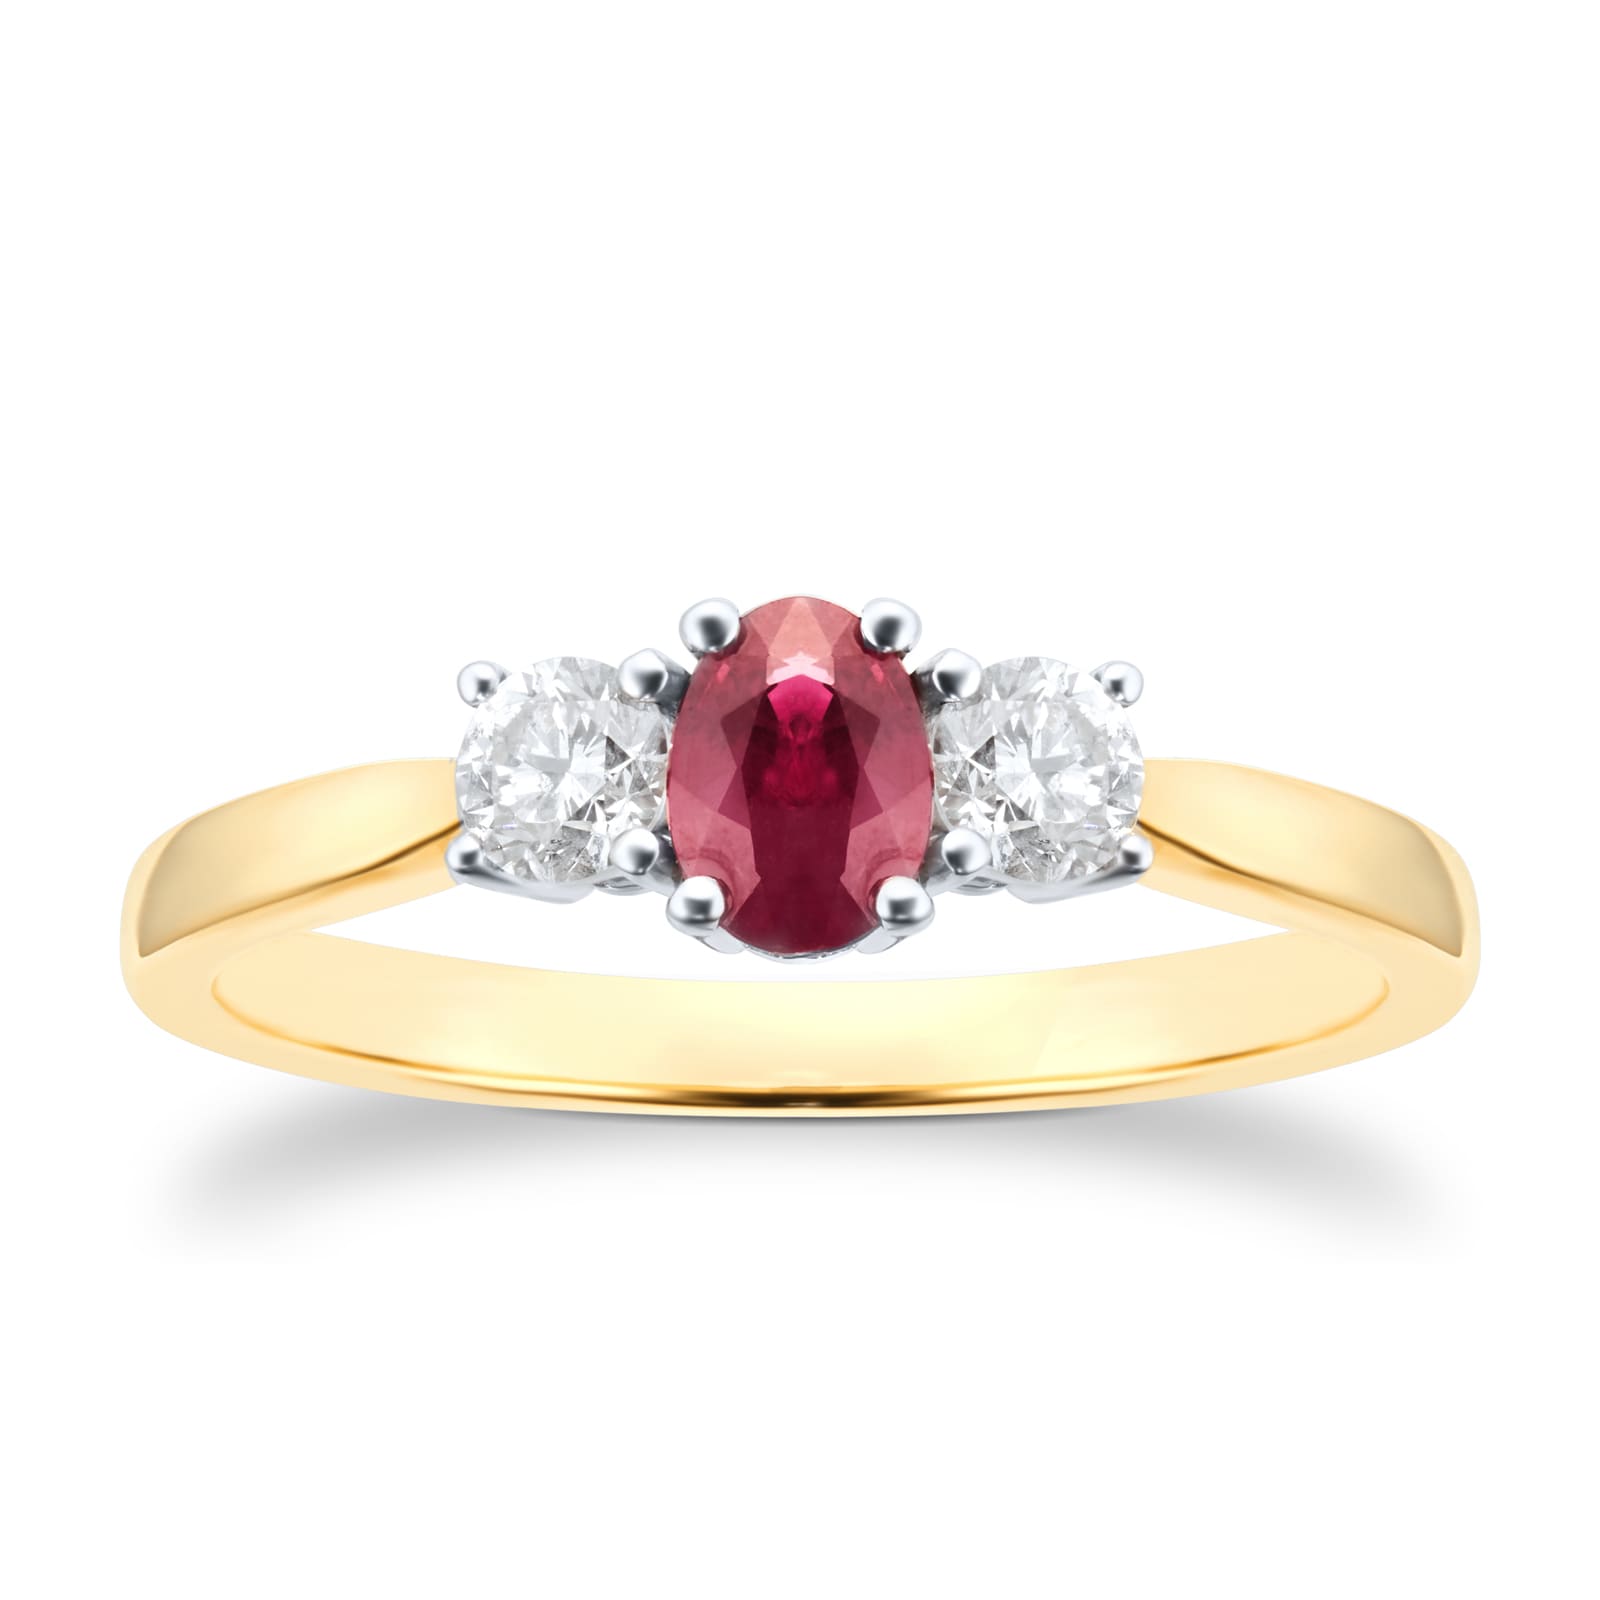 9ct Yellow and White Gold 3 Stone Ruby & Diamond Ring - Ring Size N.5